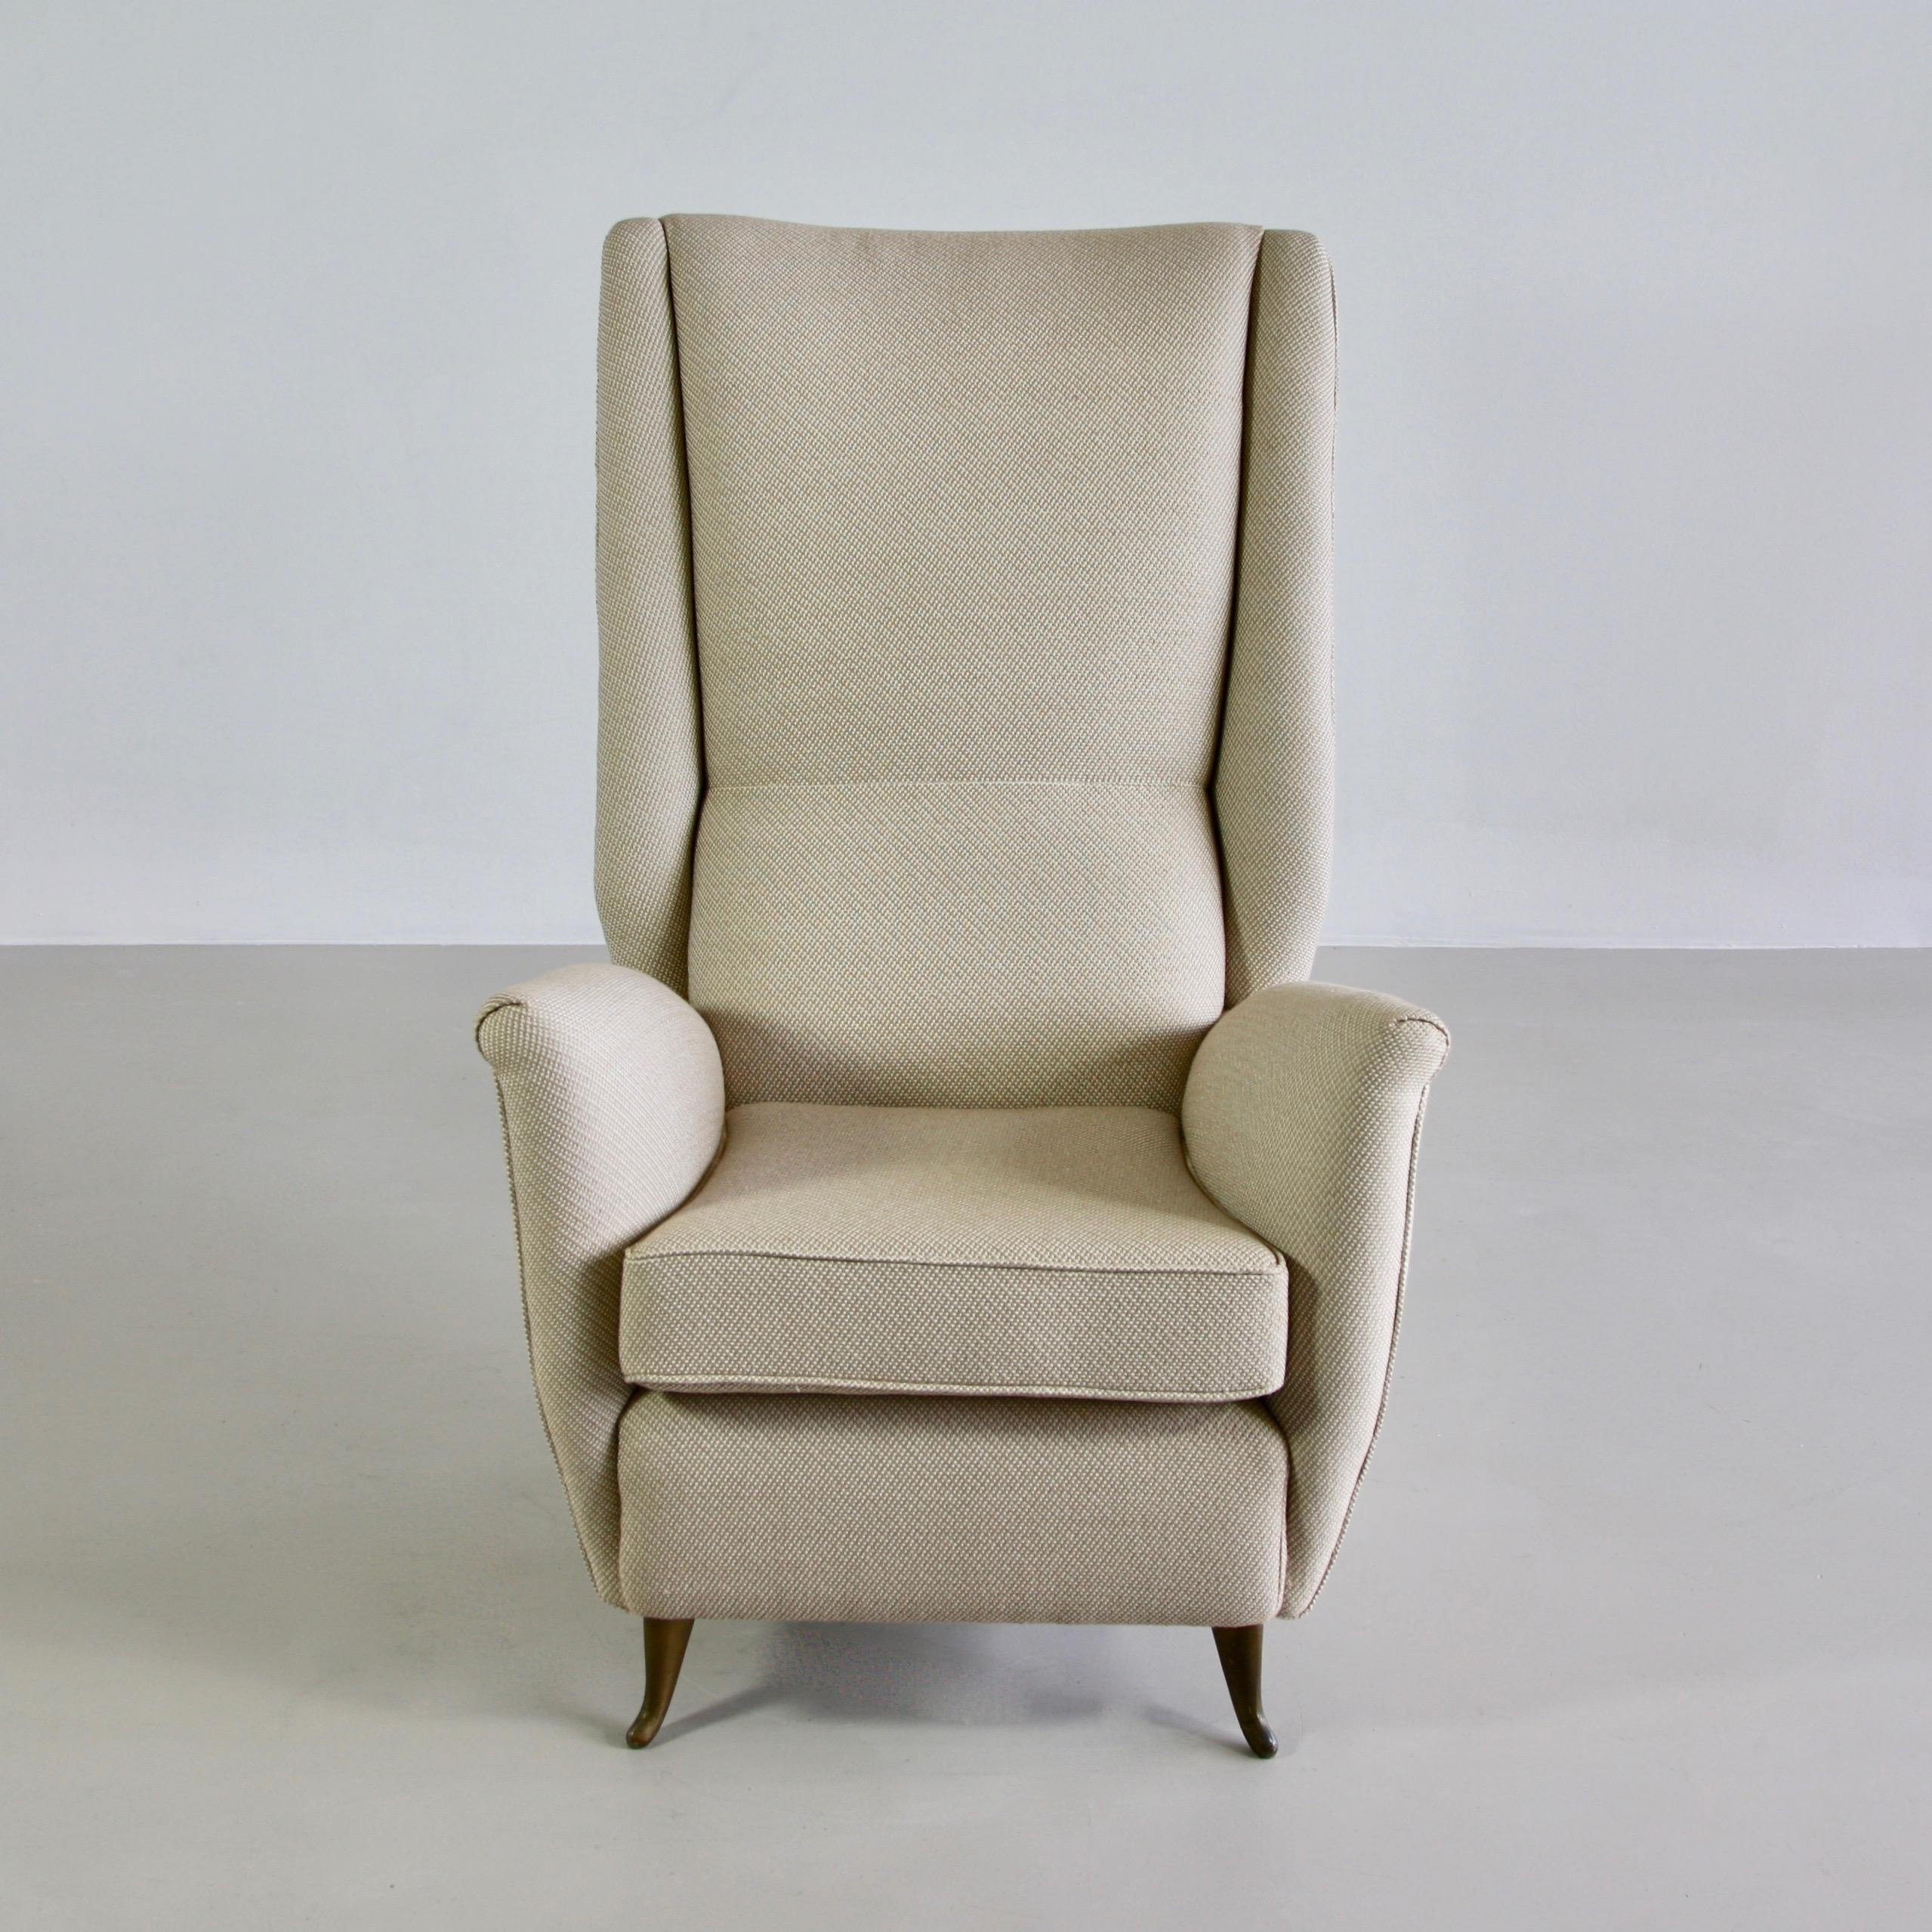 Mid-20th Century High Back Lounge Chair by I.S.A. Bergamo, Attributed to Gio Ponti